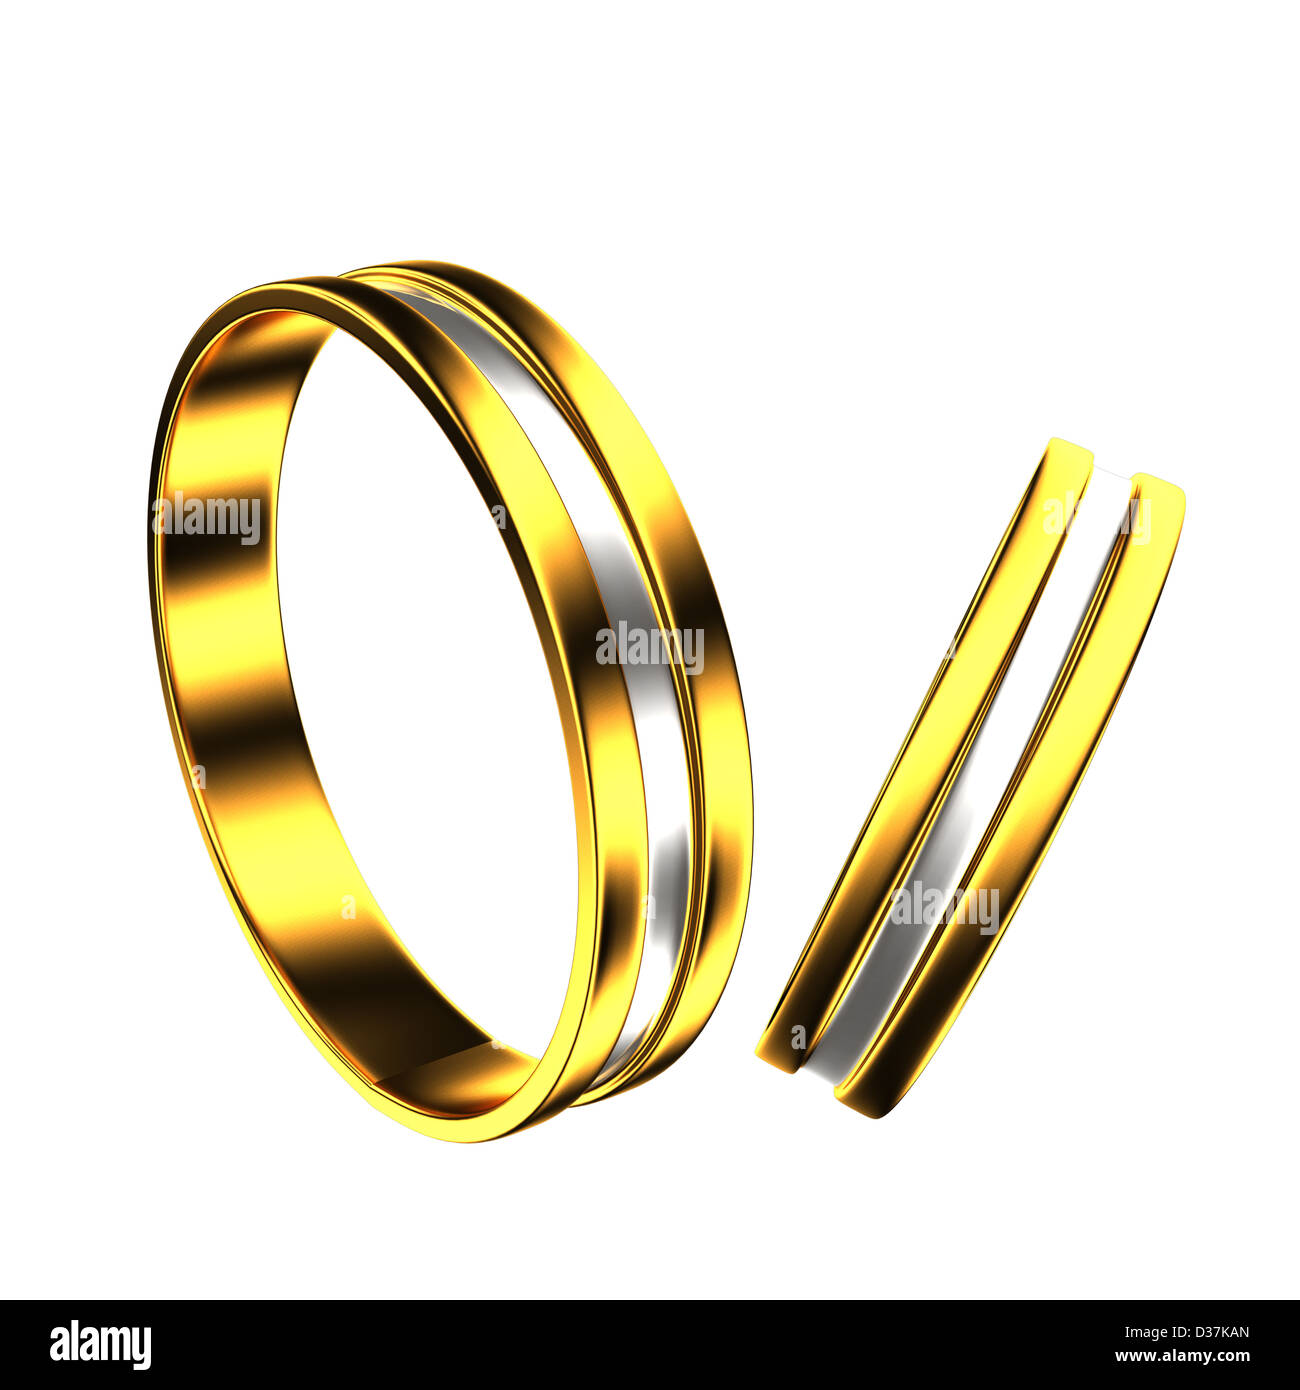 Modern ring for adv or others purpose use Stock Photo